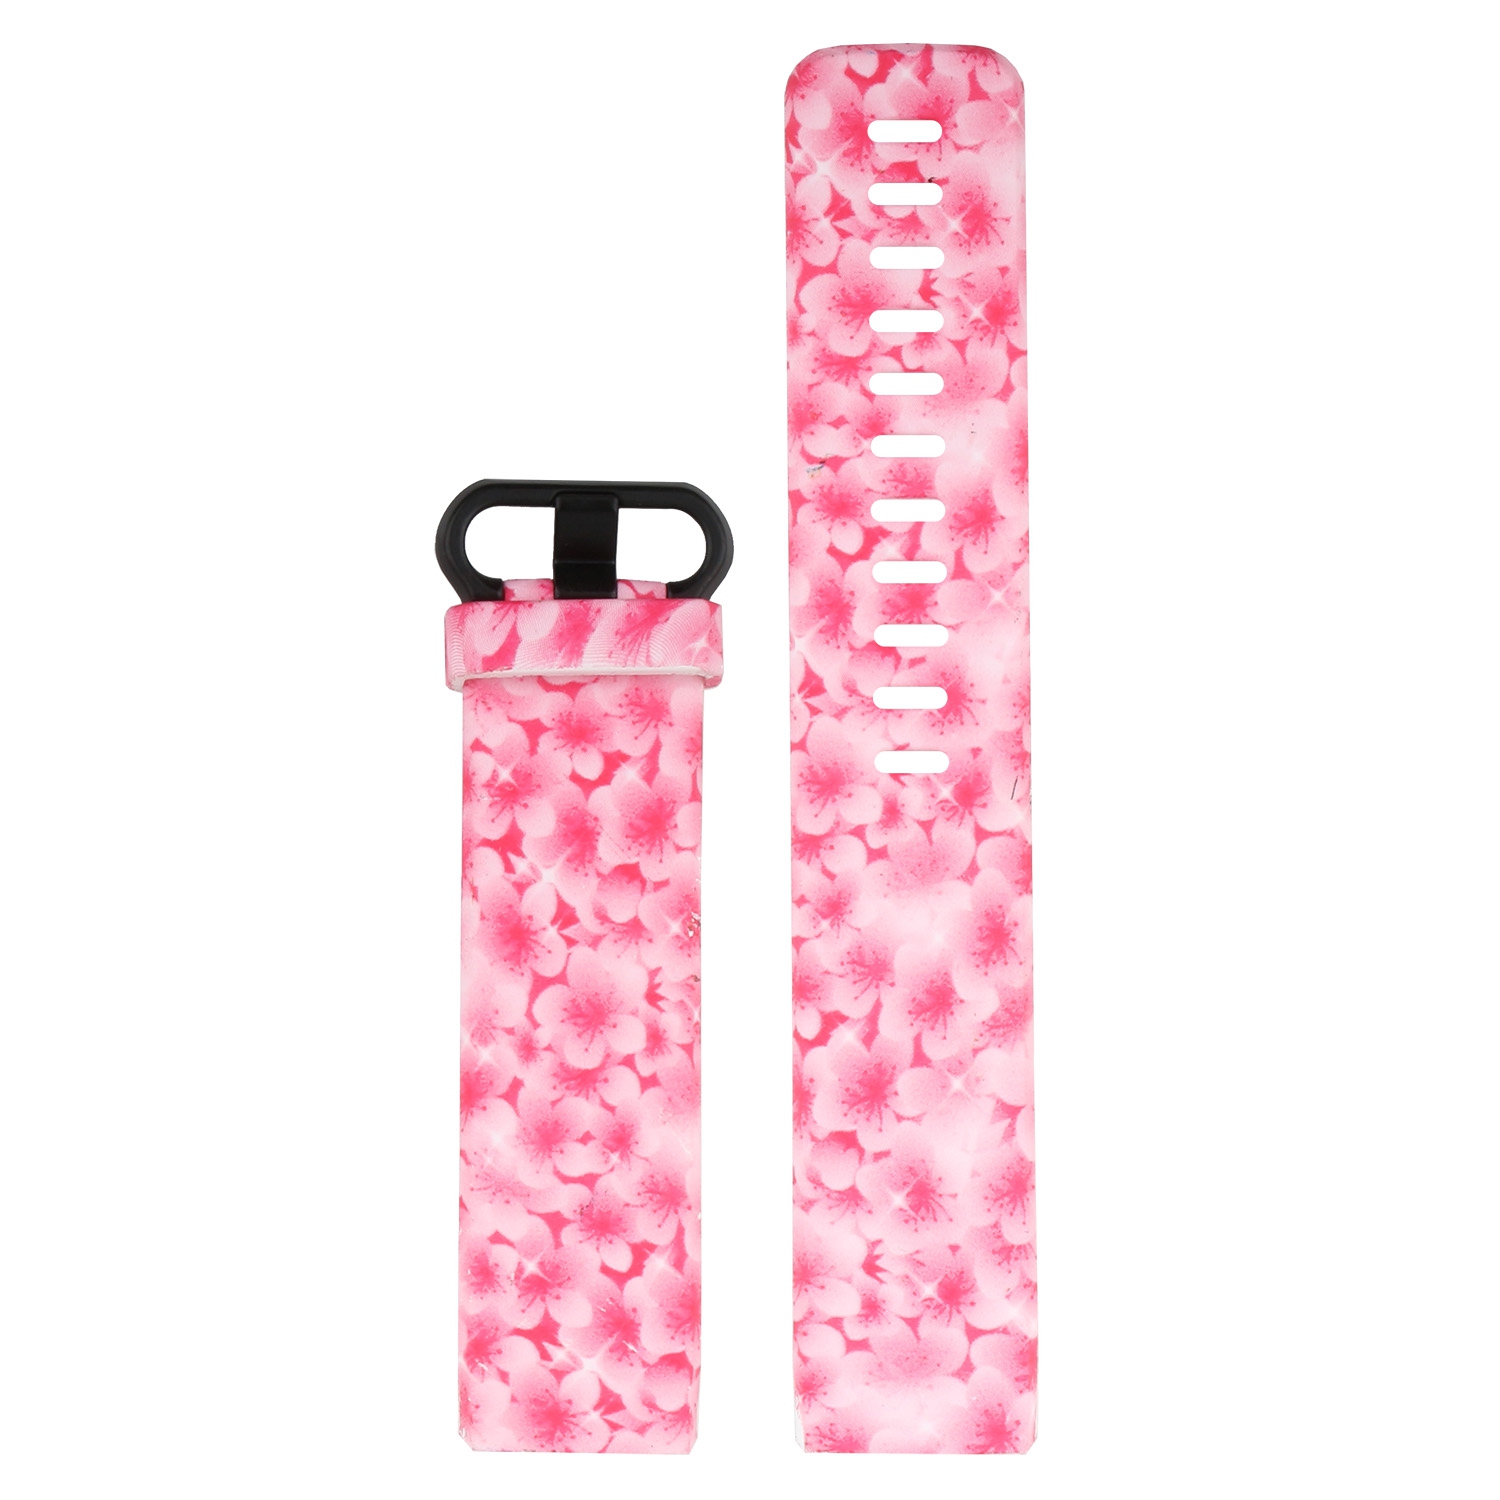 StrapsCo Patterned Silicone Rubber Watch Band Strap for Fitbit Charge 3 & Charge 4 - Medium-Long - Pink Flowers